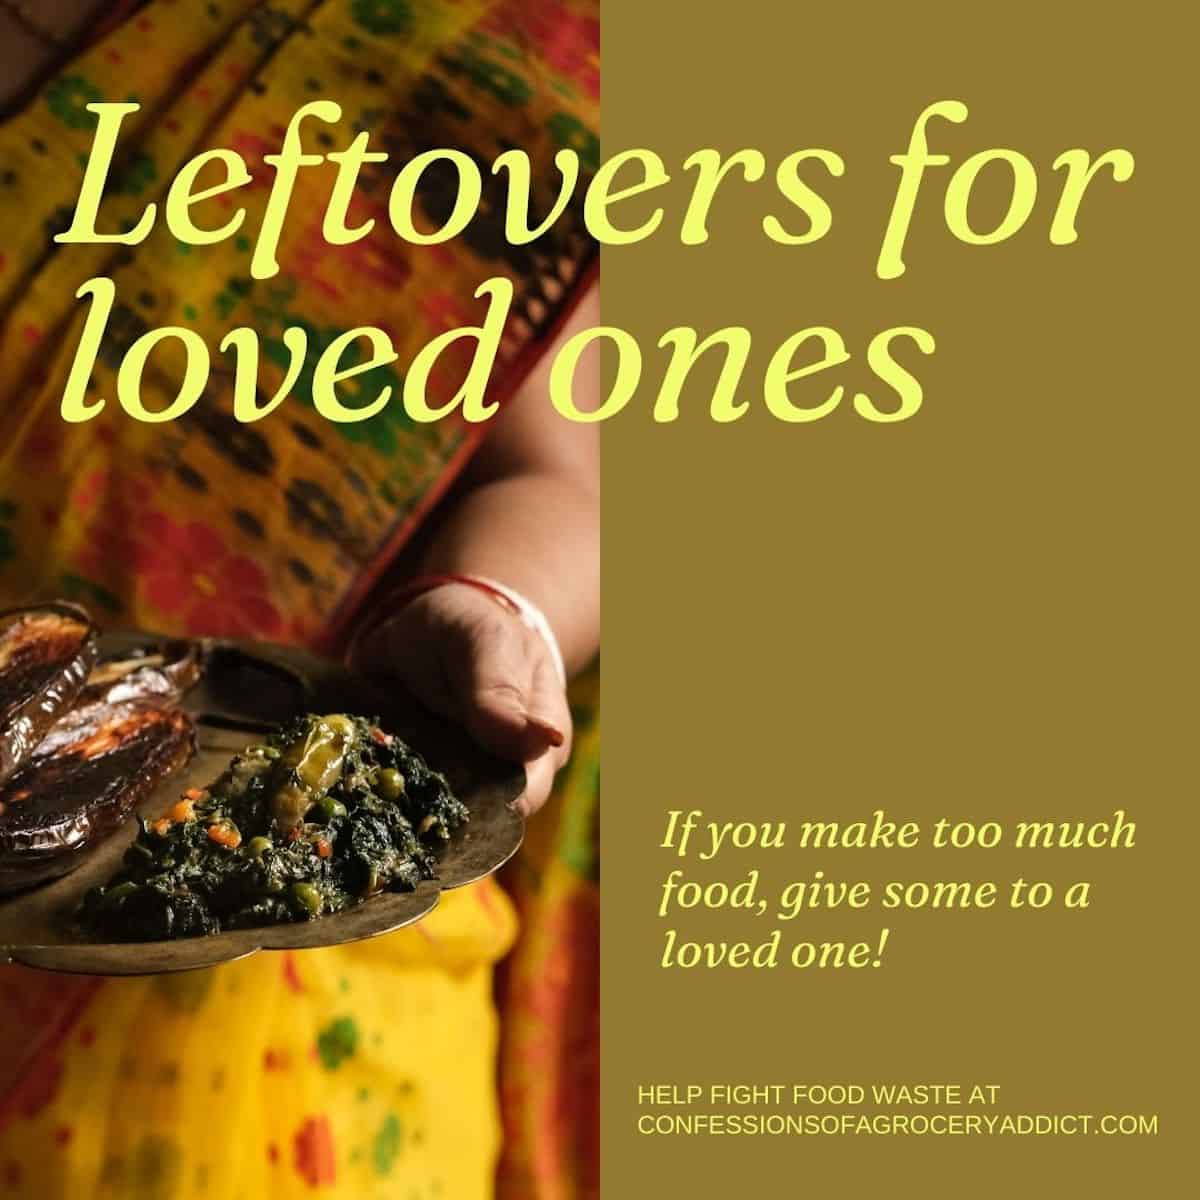 square image with a woman holding a plate of food and text overlay reading leftovers for loved ones -- if you make too much food, give some to a loved one!